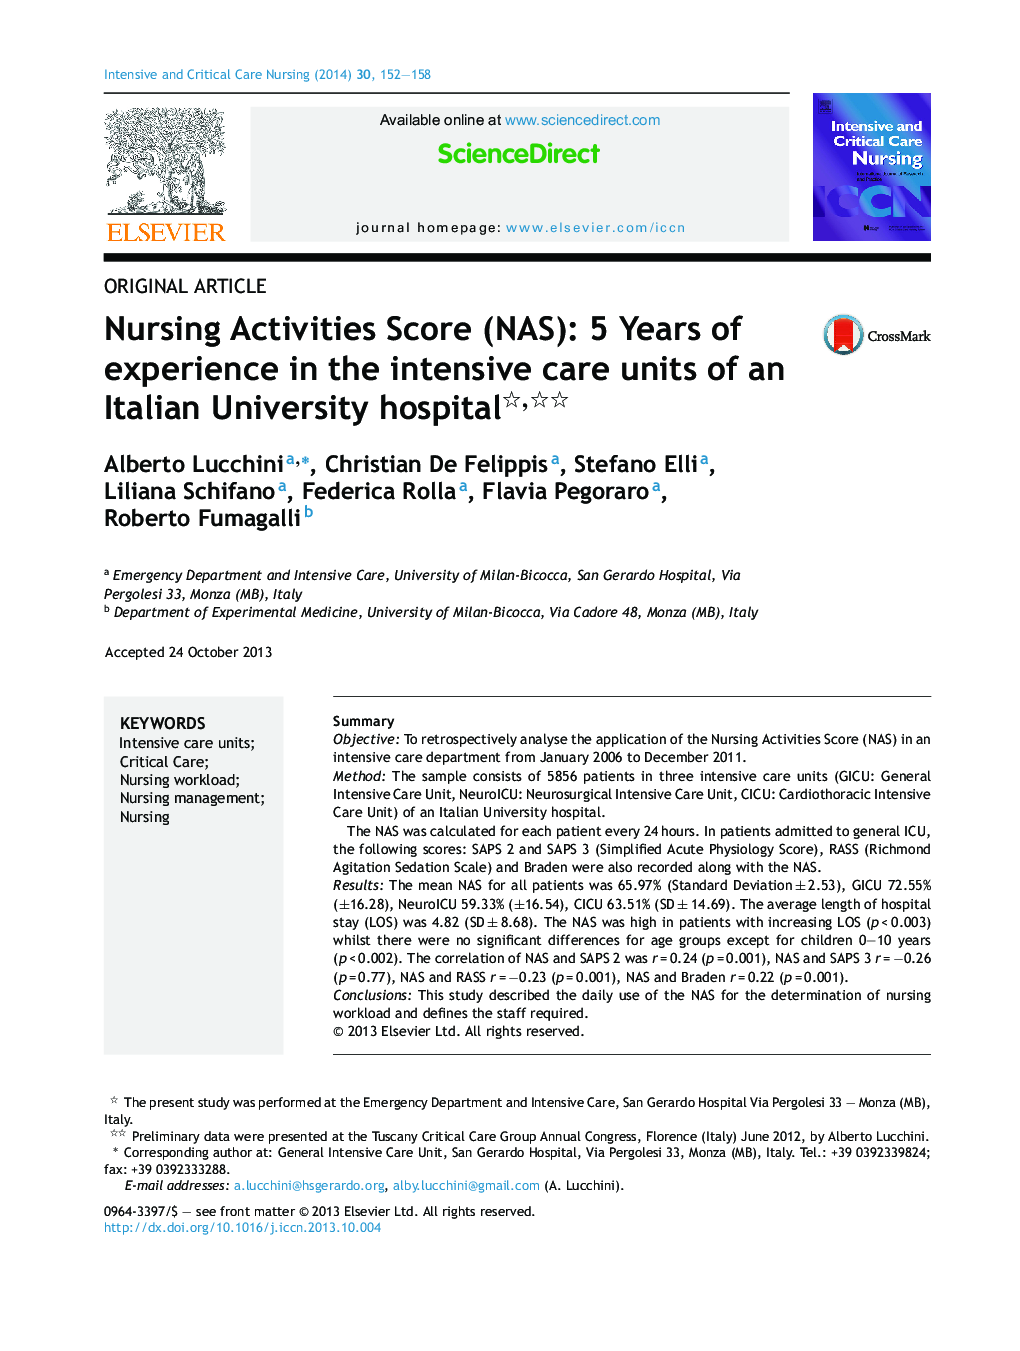 Nursing Activities Score (NAS): 5 Years of experience in the intensive care units of an Italian University hospital 